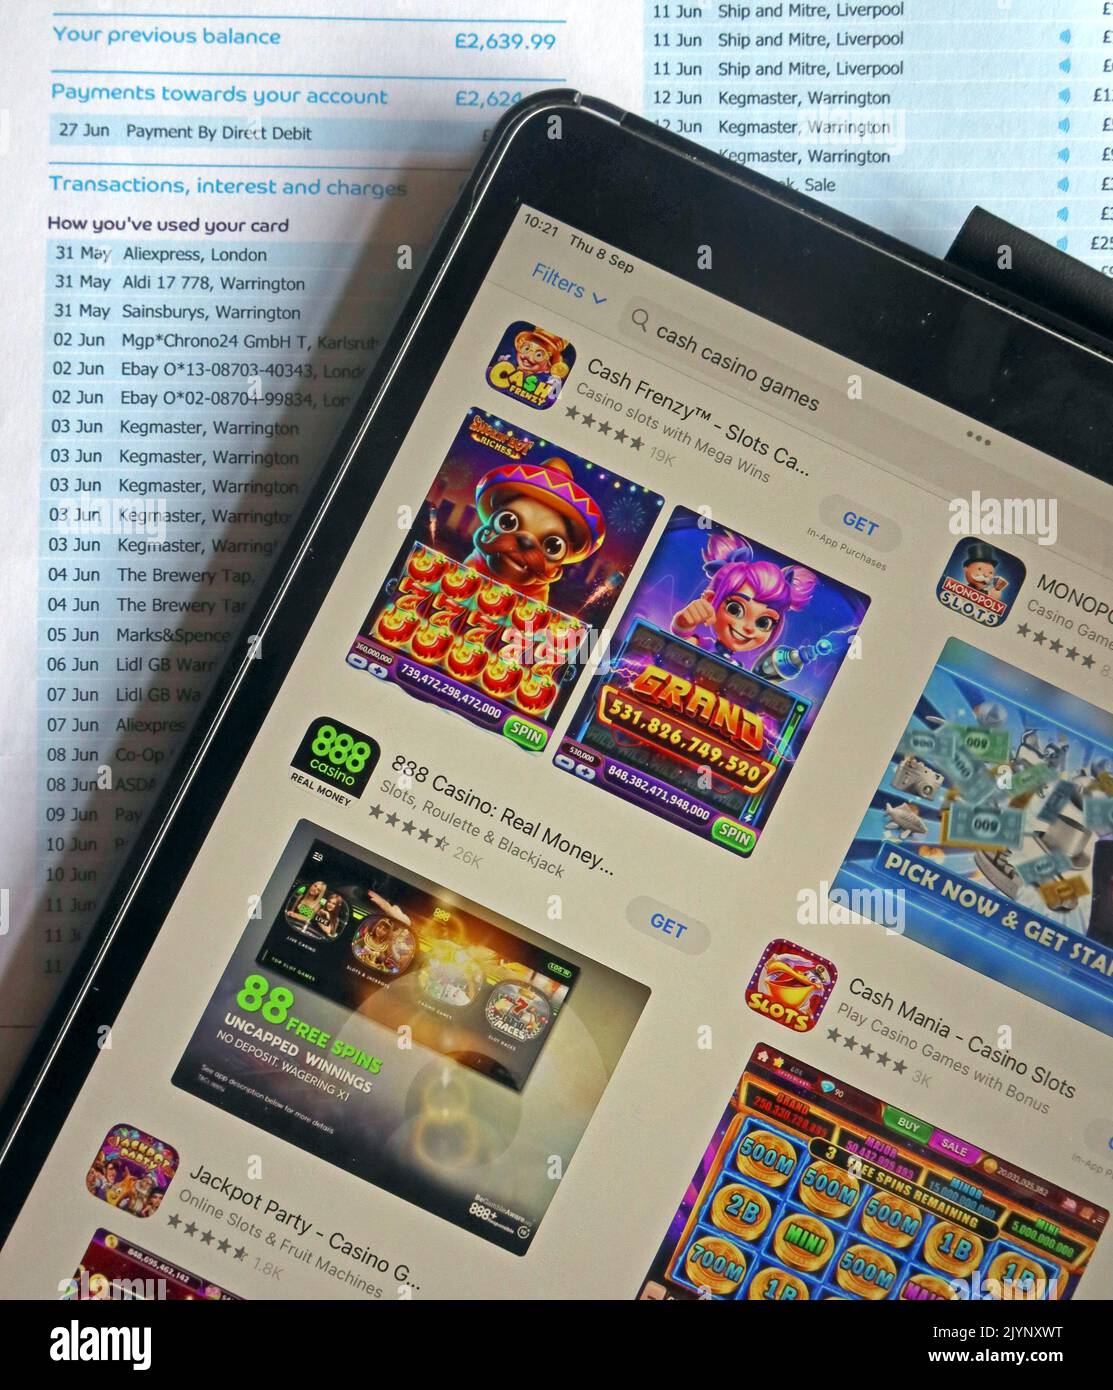 Easy availability of tablet/smartphone casino apps to start gambling, to address increasing bills, such as credit cards and overdrafts Stock Photo